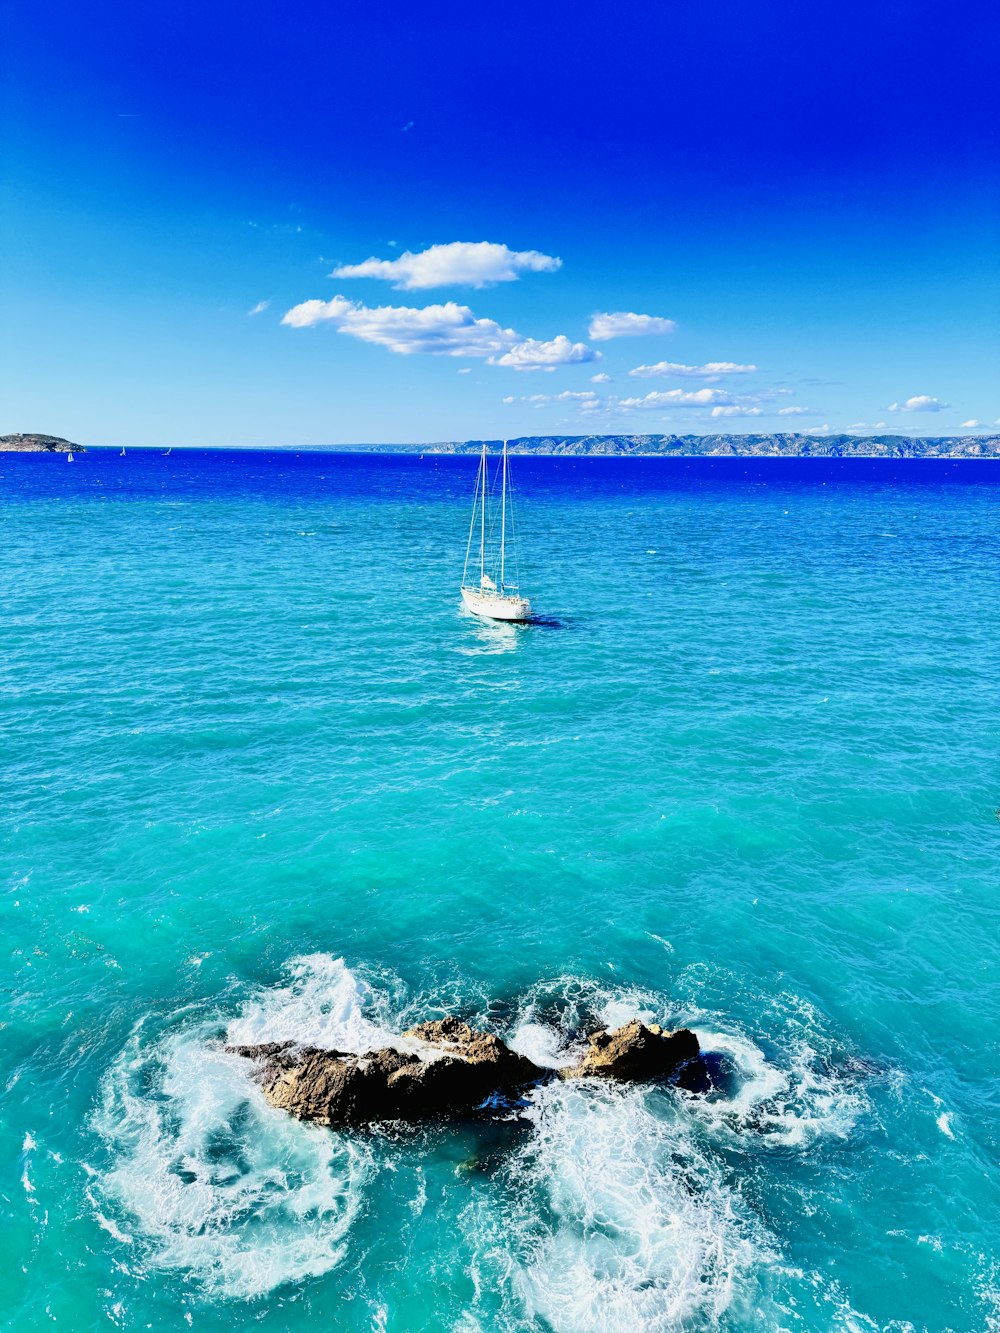 a sailboat in the ocean with a rock in the foreground